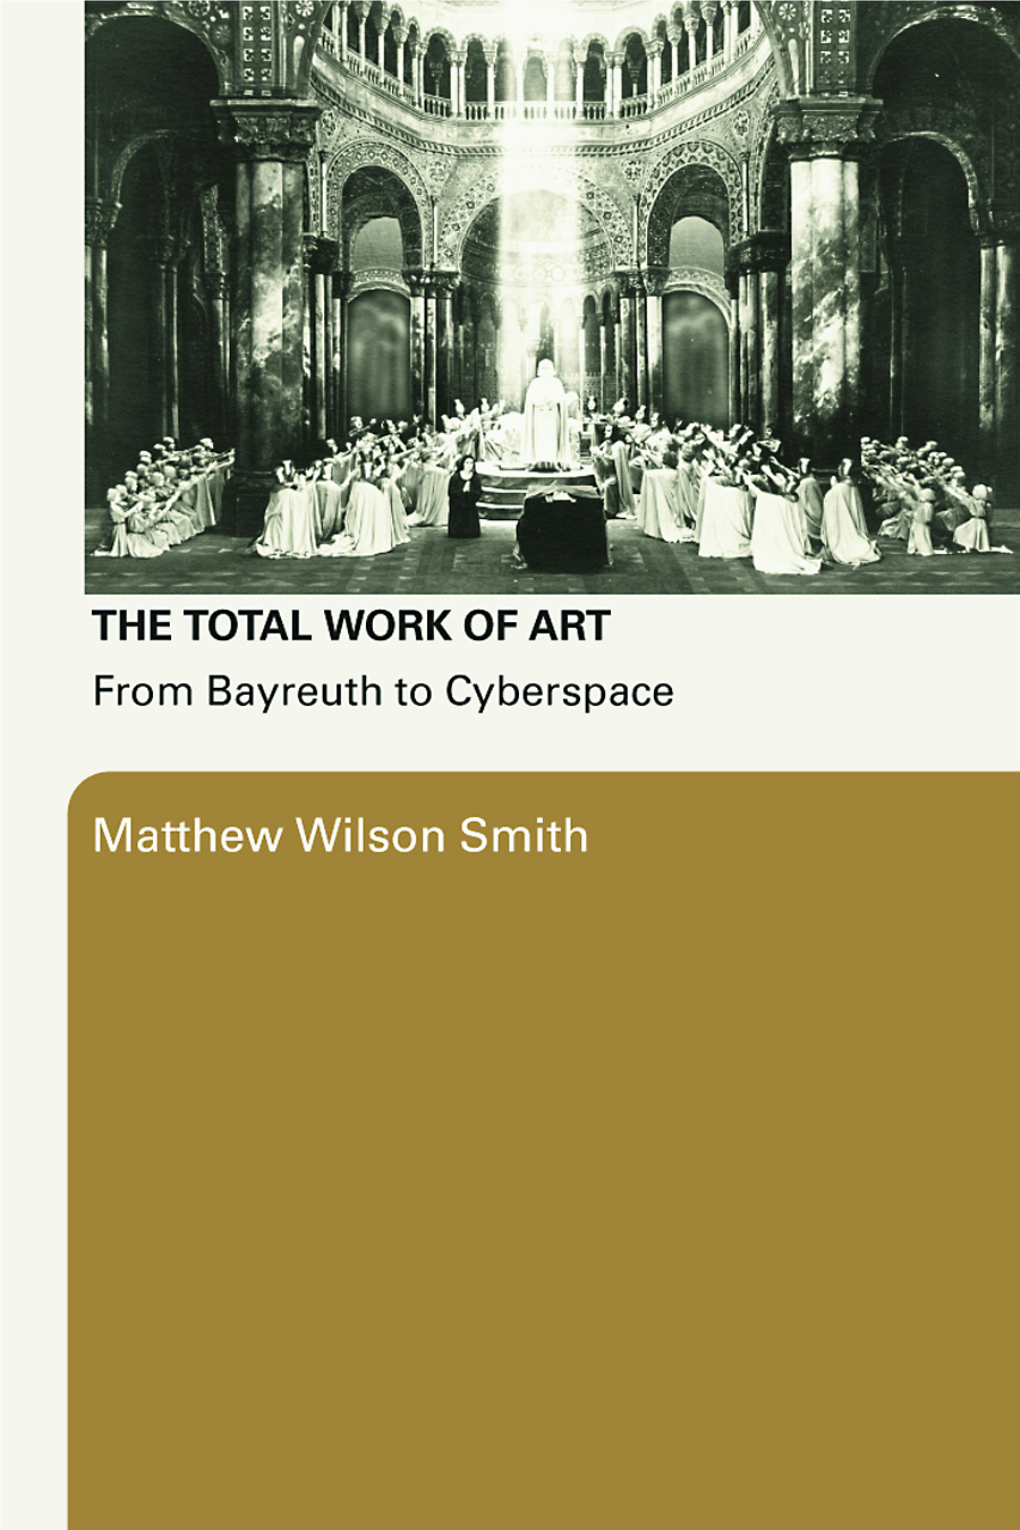 The Total Work of Art: from Bayreuth to Cyberspace Is an Outstanding Accomplishment